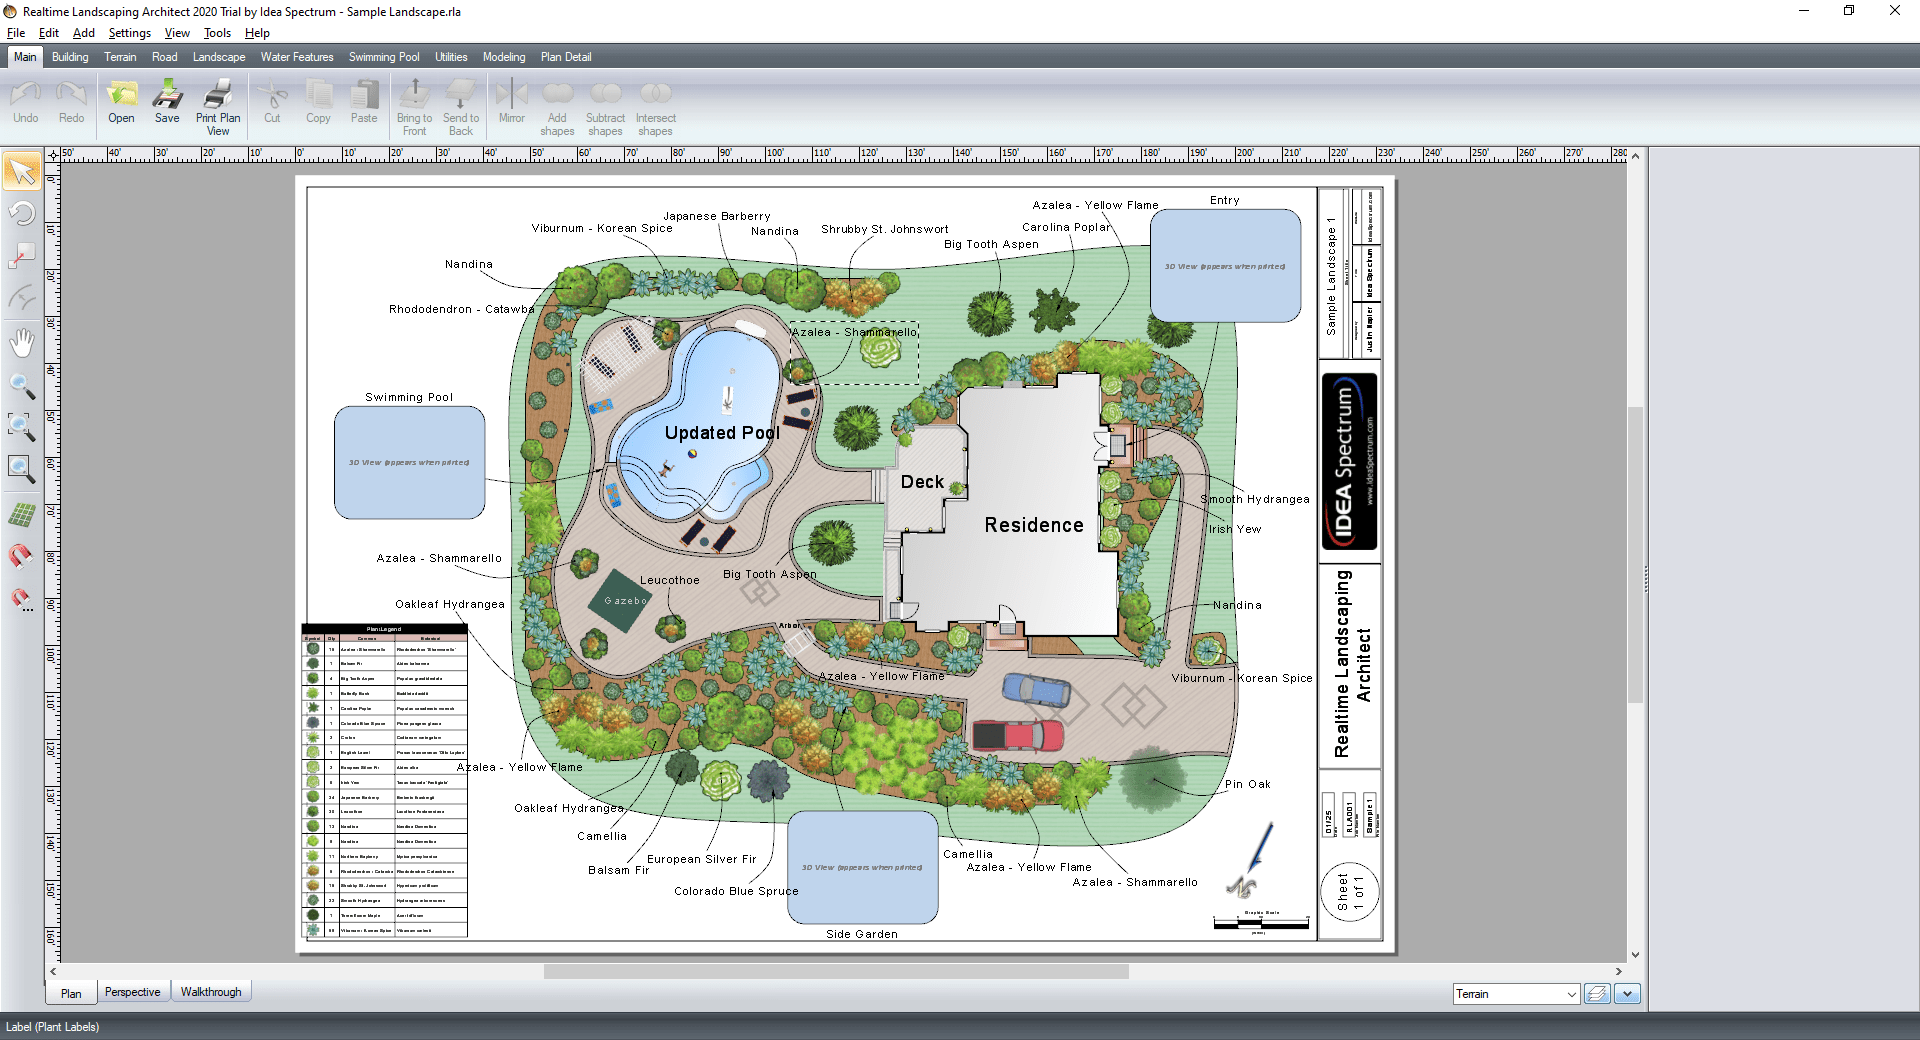 Realtime Landscaping Architect 2020, Realtime Landscaping Plus Vs Pro